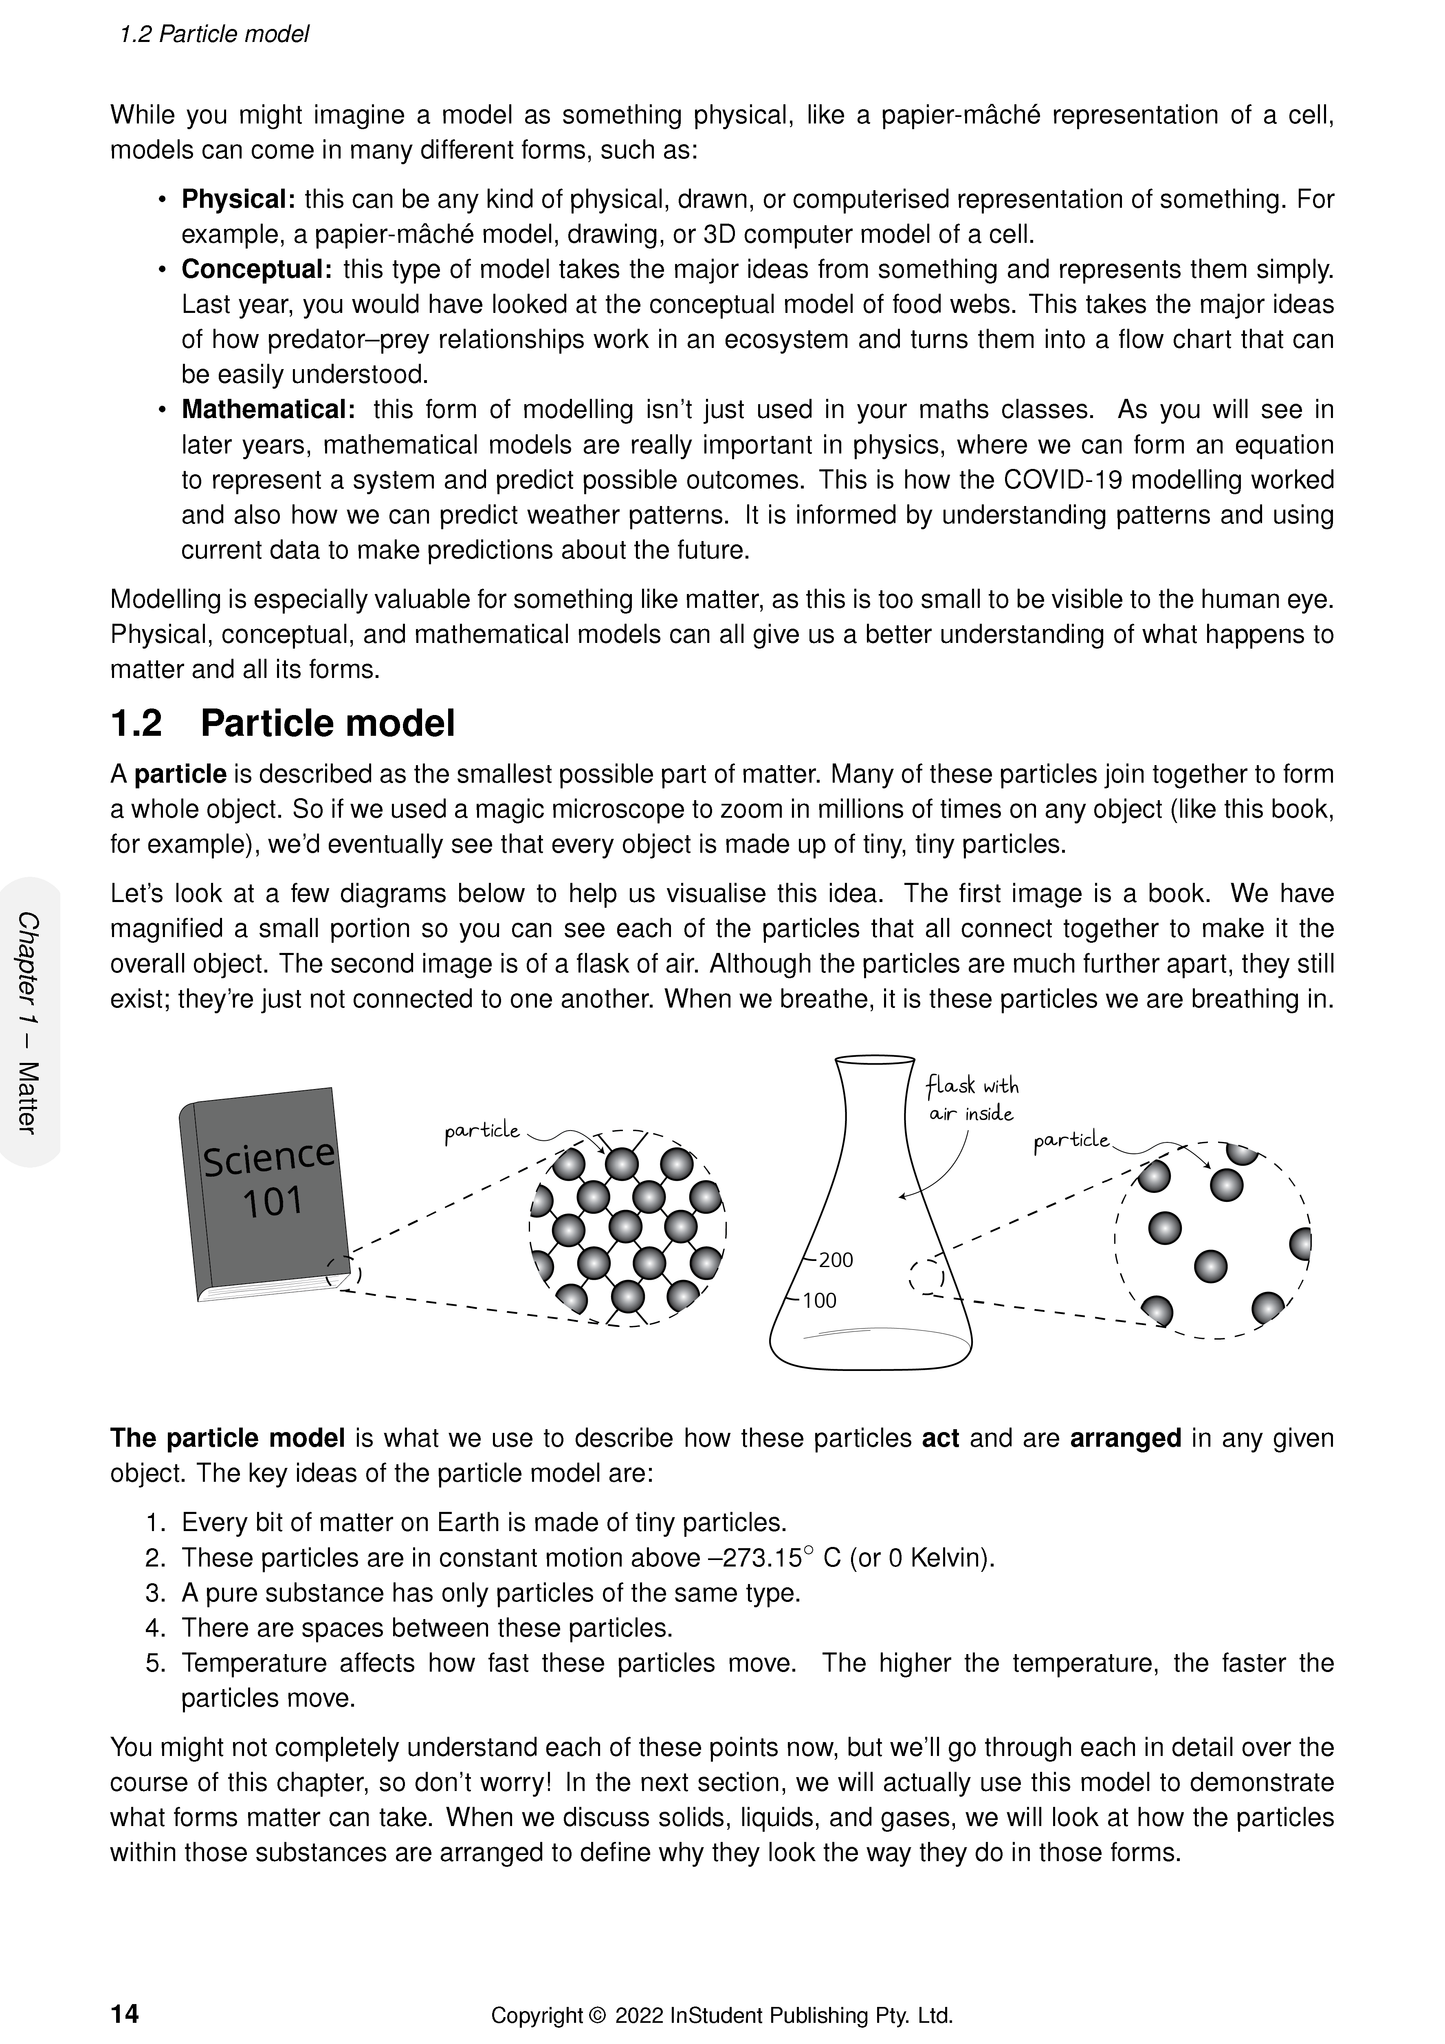 ATAR Notes Year 8 Science Complete Course Notes